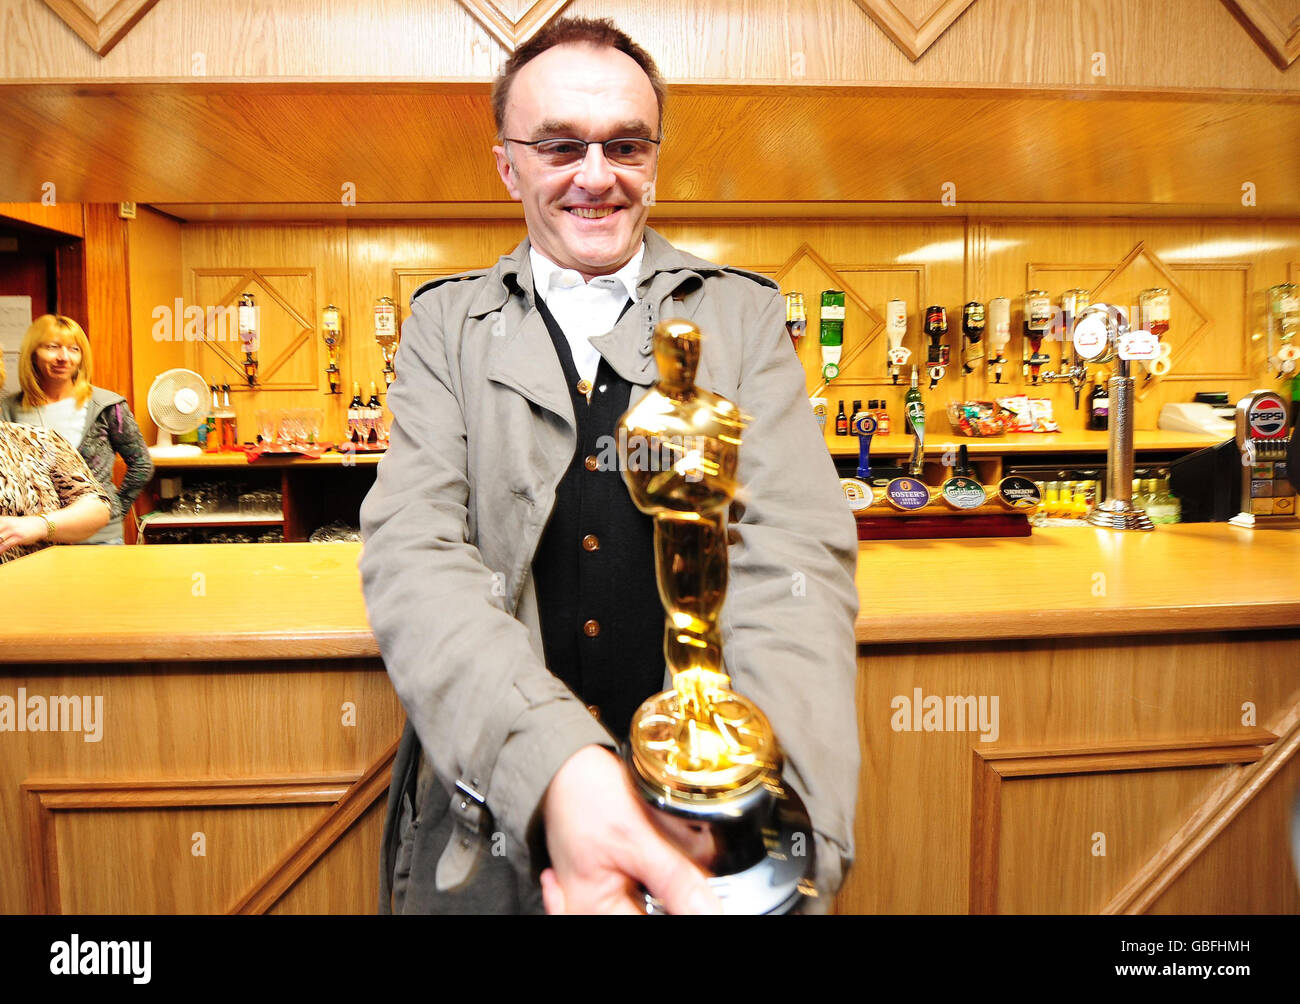 Director Danny Boyle holds his Oscars for Best Director at St Mary's Catholic Social Club in Radliffe near Manchester. Stock Photo